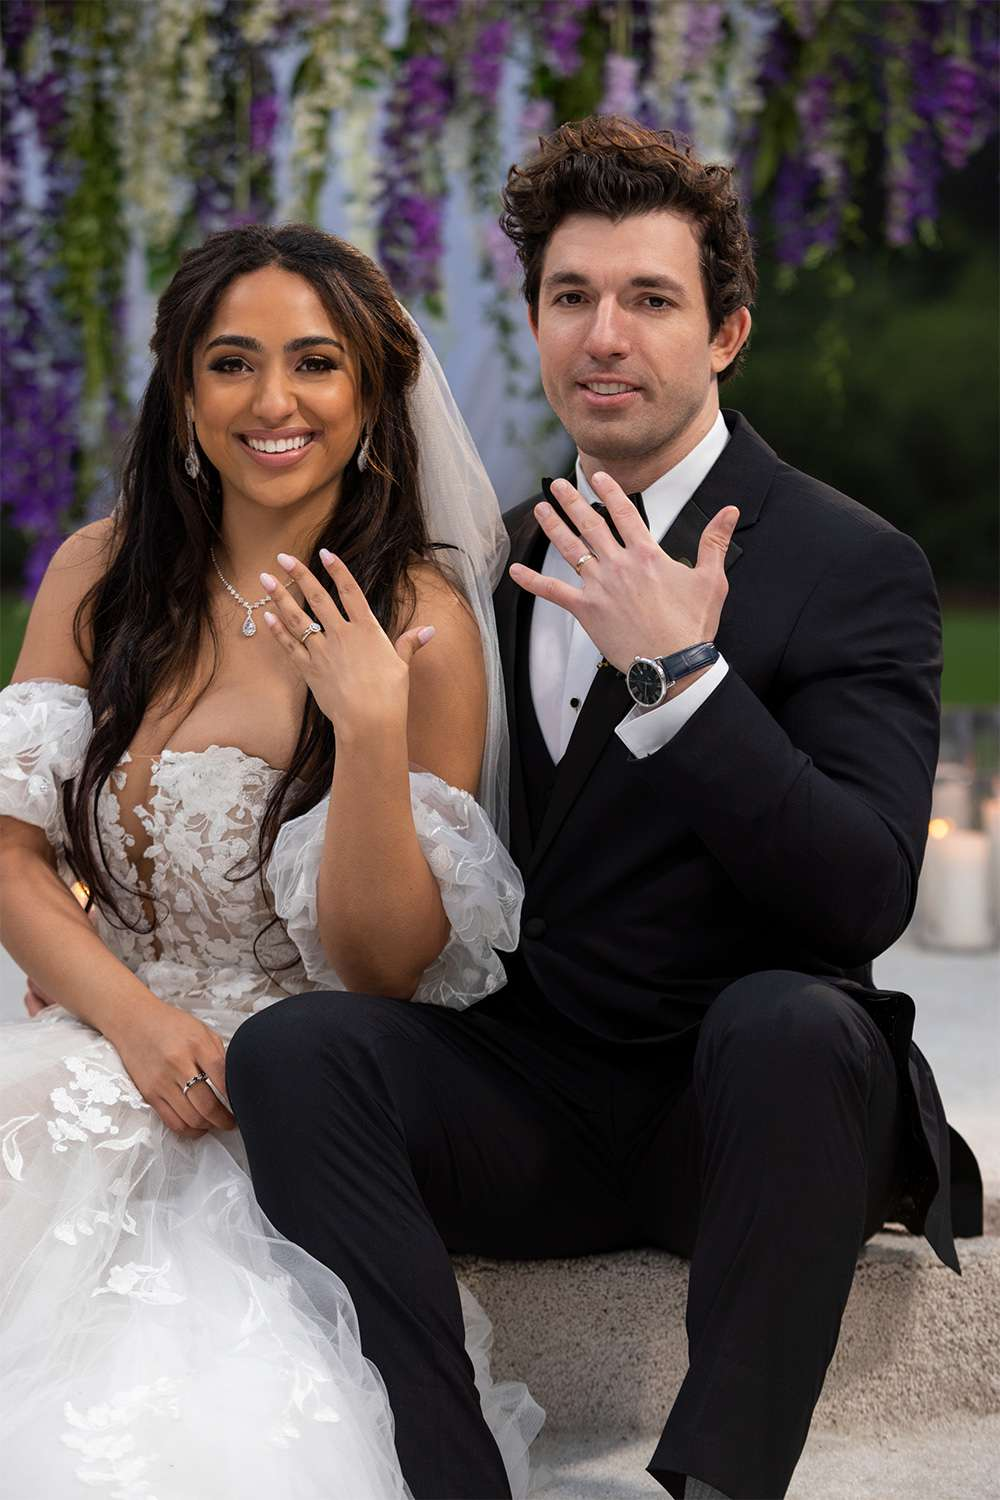 Bliss Poureetezadi tied the knot with Zack Goytowski while they were on the show